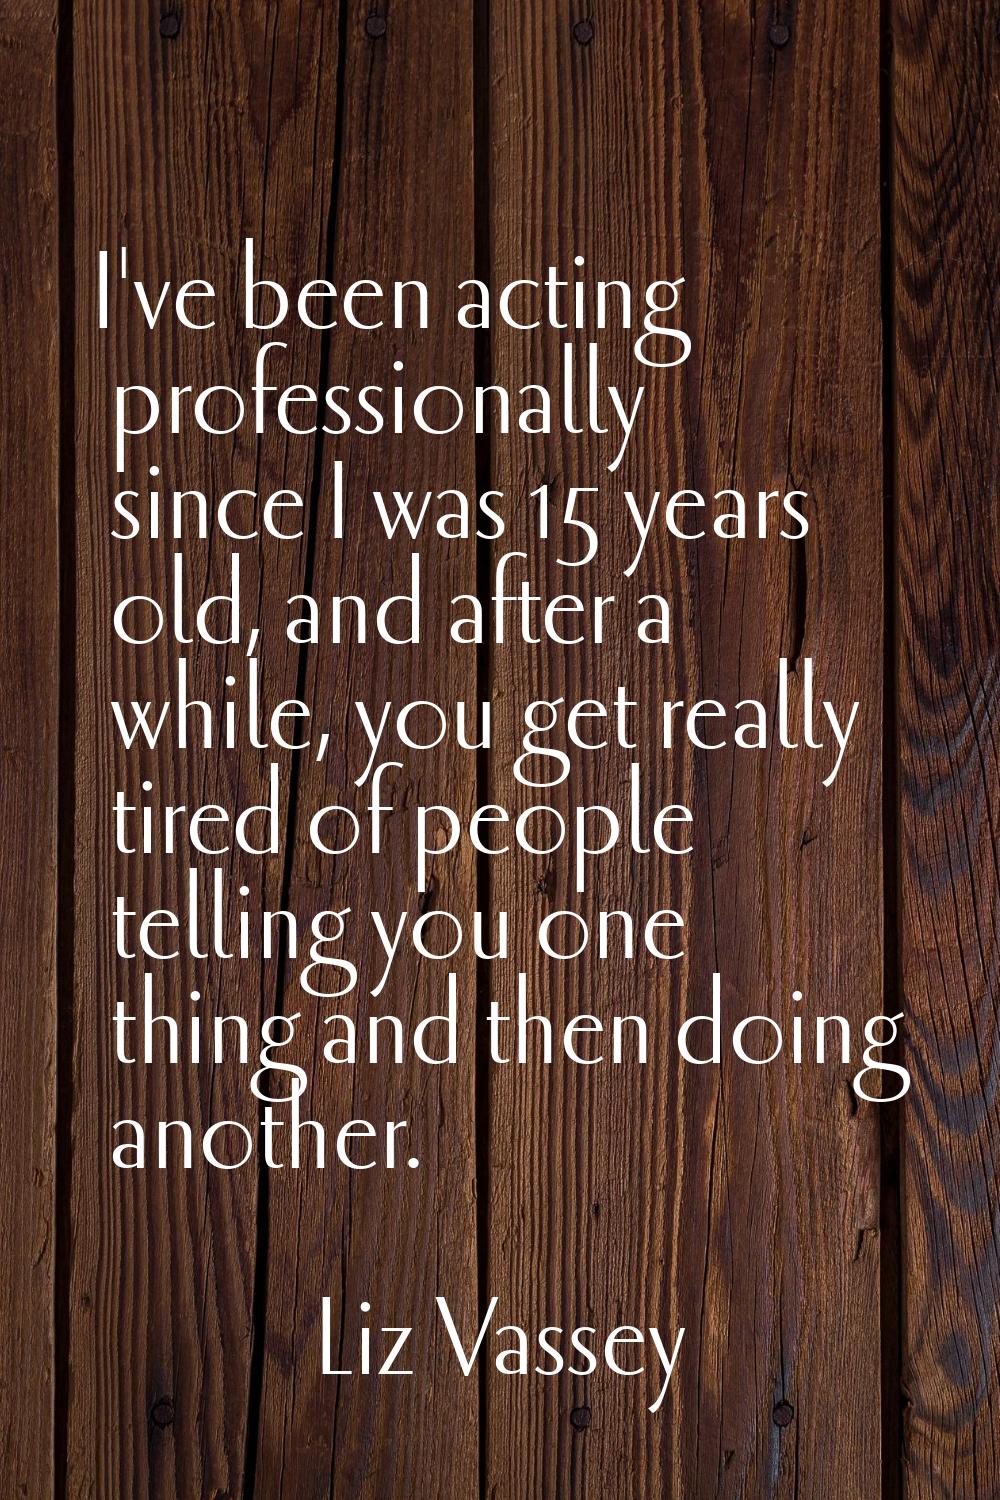 I've been acting professionally since I was 15 years old, and after a while, you get really tired o